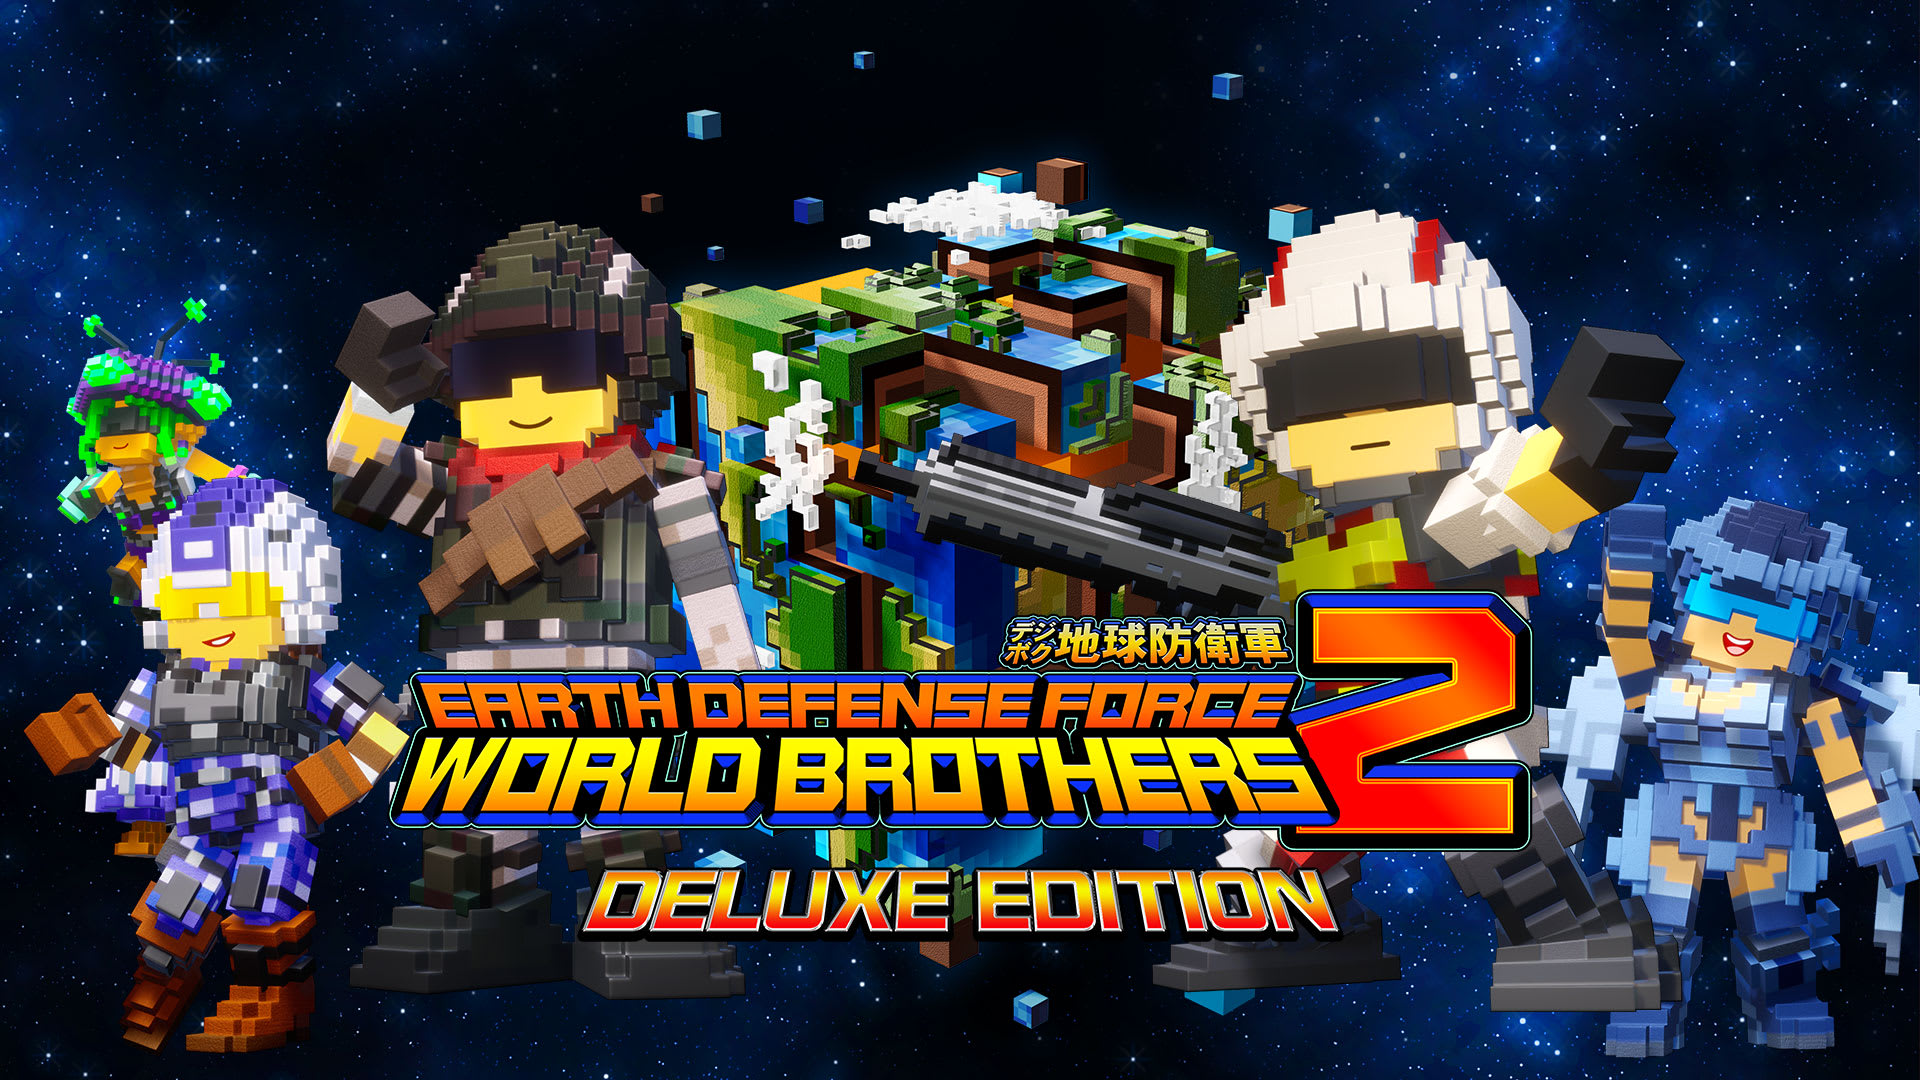 EARTH DEFENSE FORCE: WORLD BROTHERS 2 Deluxe Edition 1